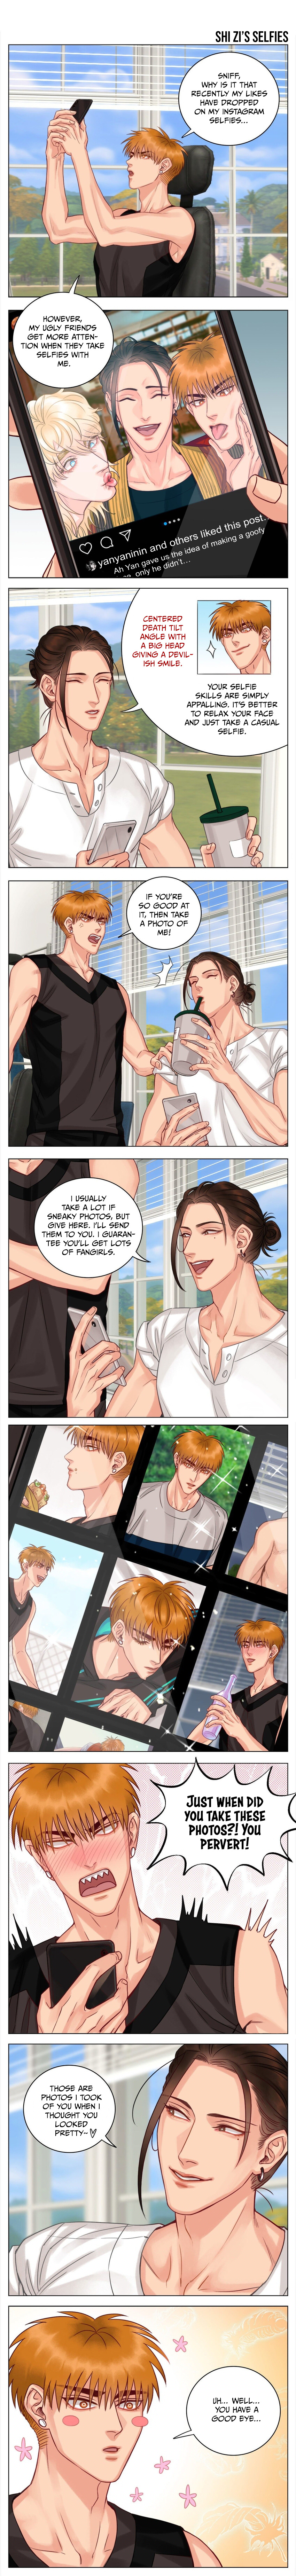 Boy's Dormitory 303 Chapter 47: Shi Zi’S Selfies - Picture 2